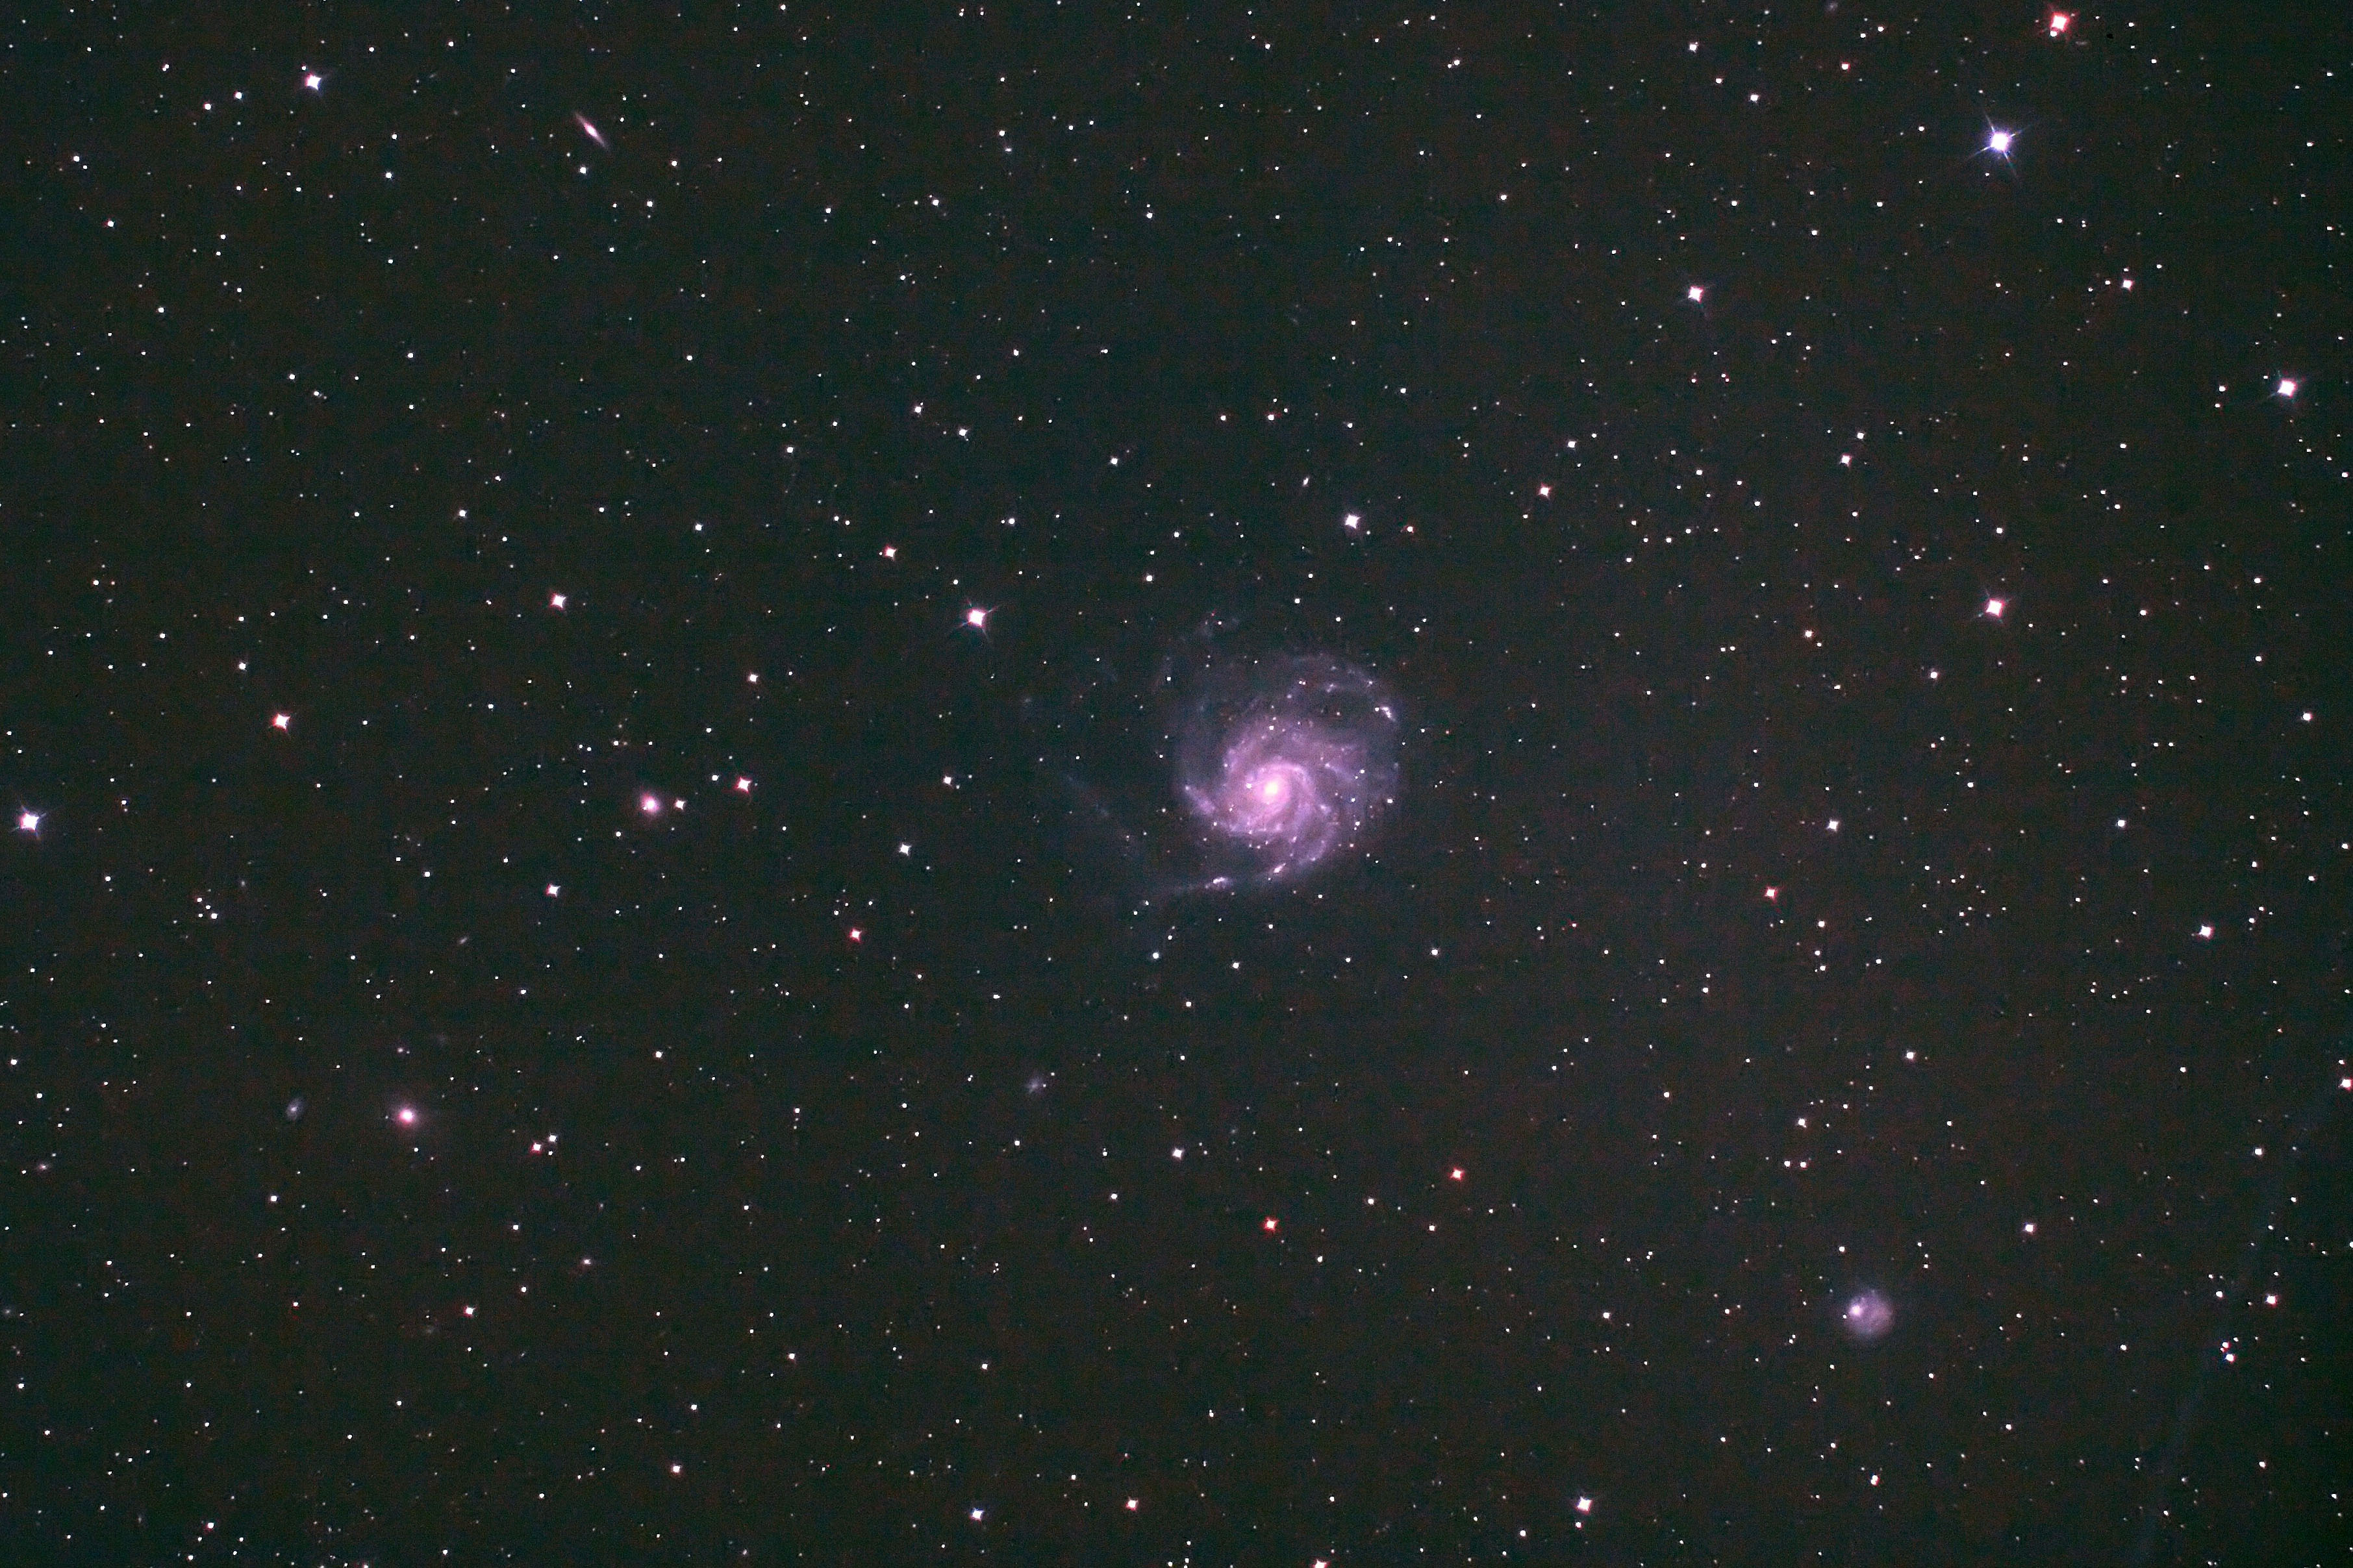 M101_120124_E160_16-300s_ps5_001cgs_filtered3.jpg